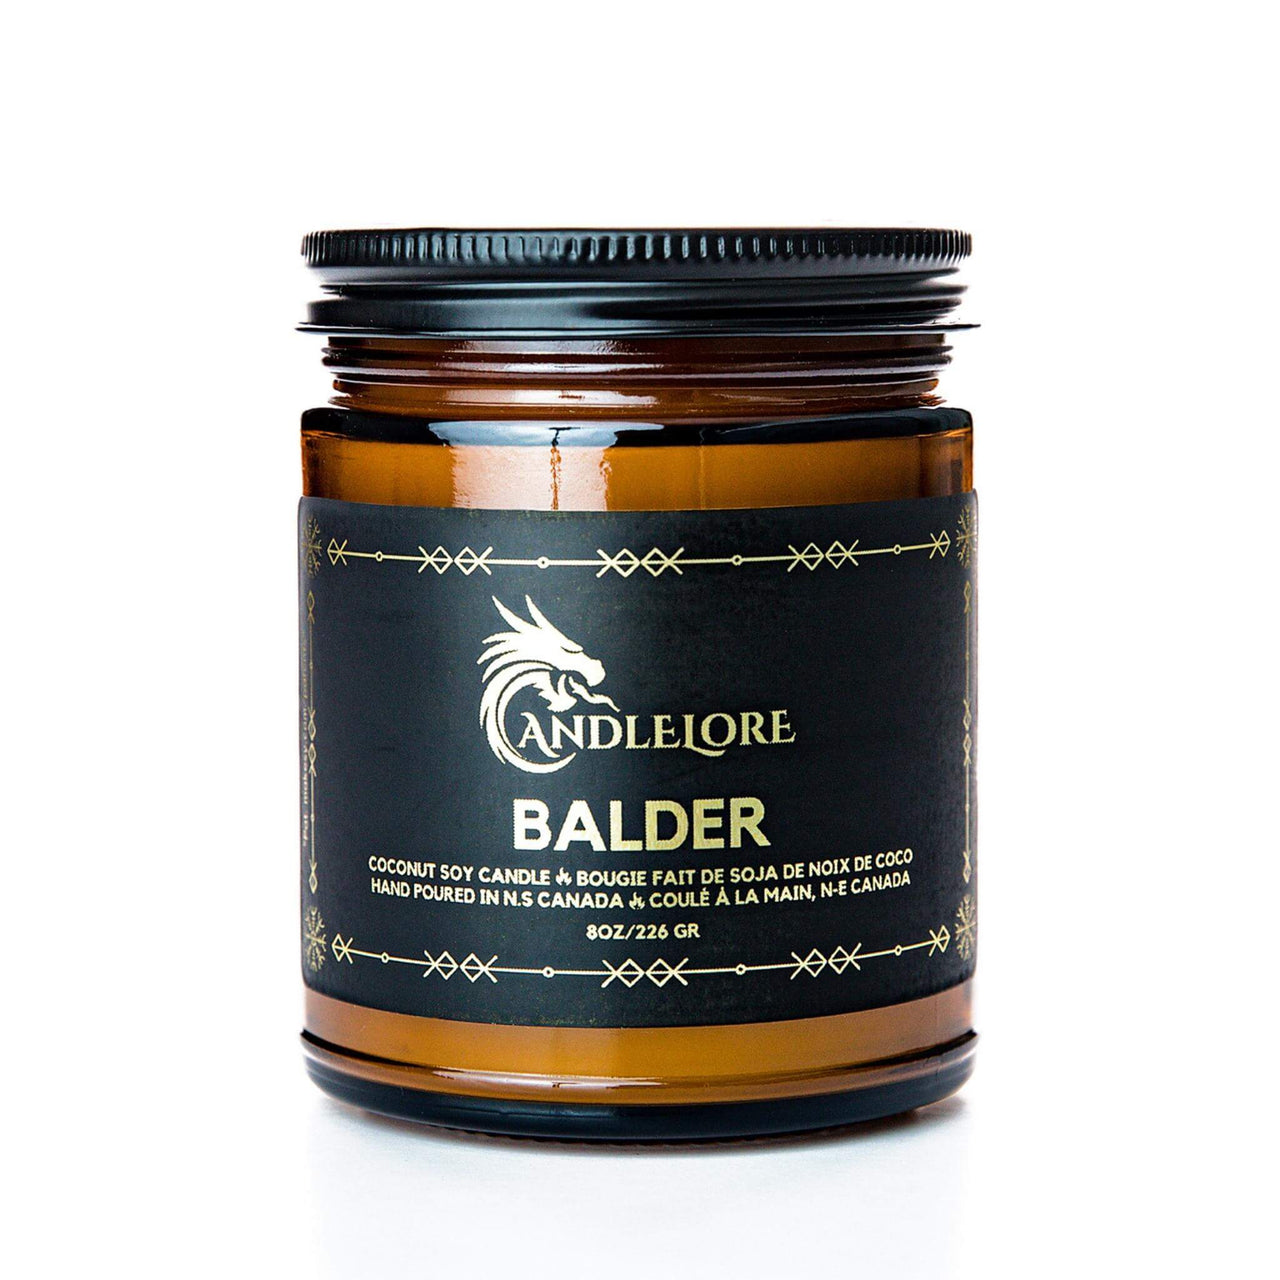 Medium Balder scented candle on a white background